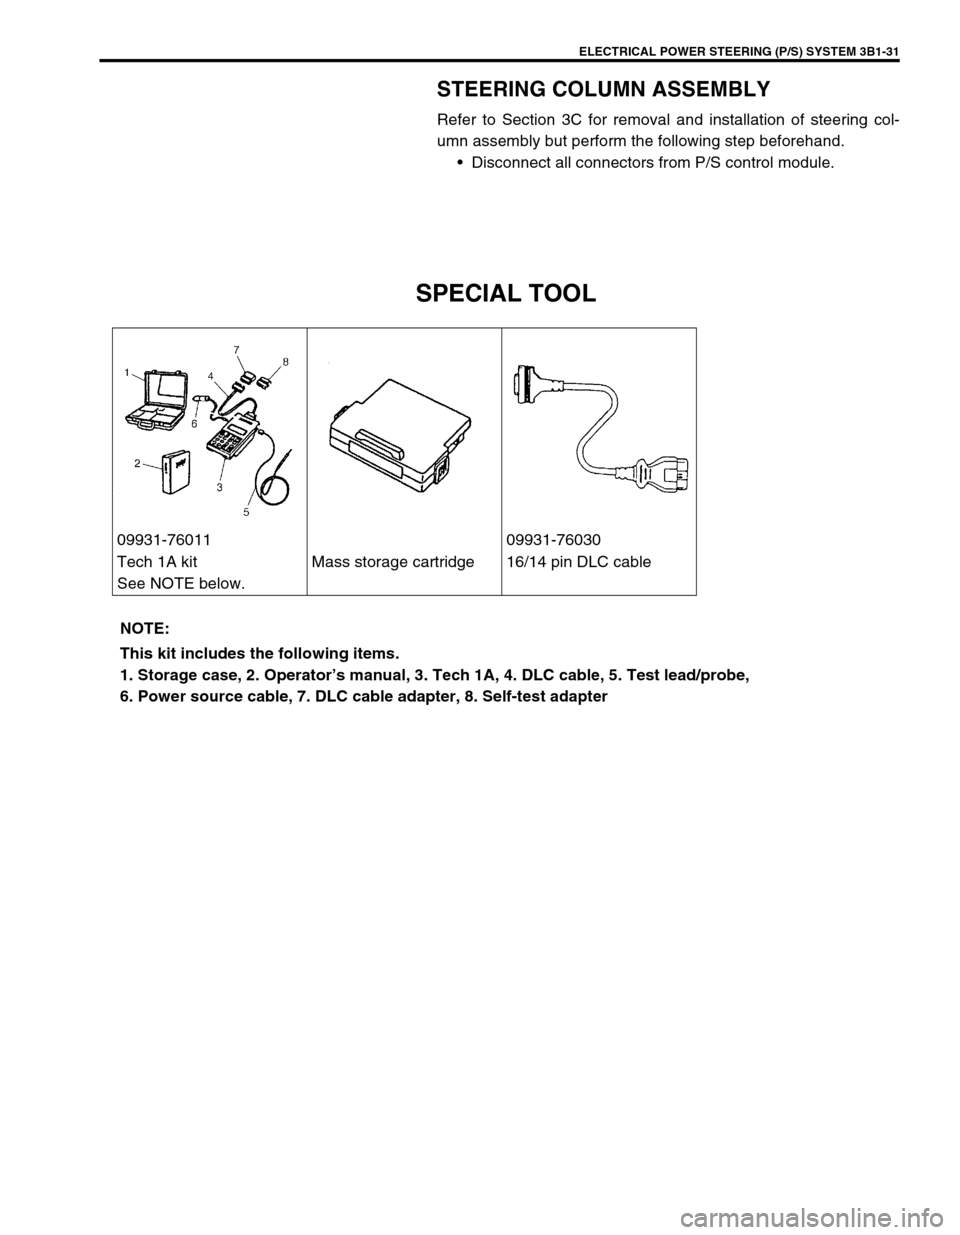 SUZUKI SWIFT 2000 1.G RG413 Service Workshop Manual ELECTRICAL POWER STEERING (P/S) SYSTEM 3B1-31
STEERING COLUMN ASSEMBLY
Refer to Section 3C for removal and installation of steering col-
umn assembly but perform the following step beforehand.
Discon